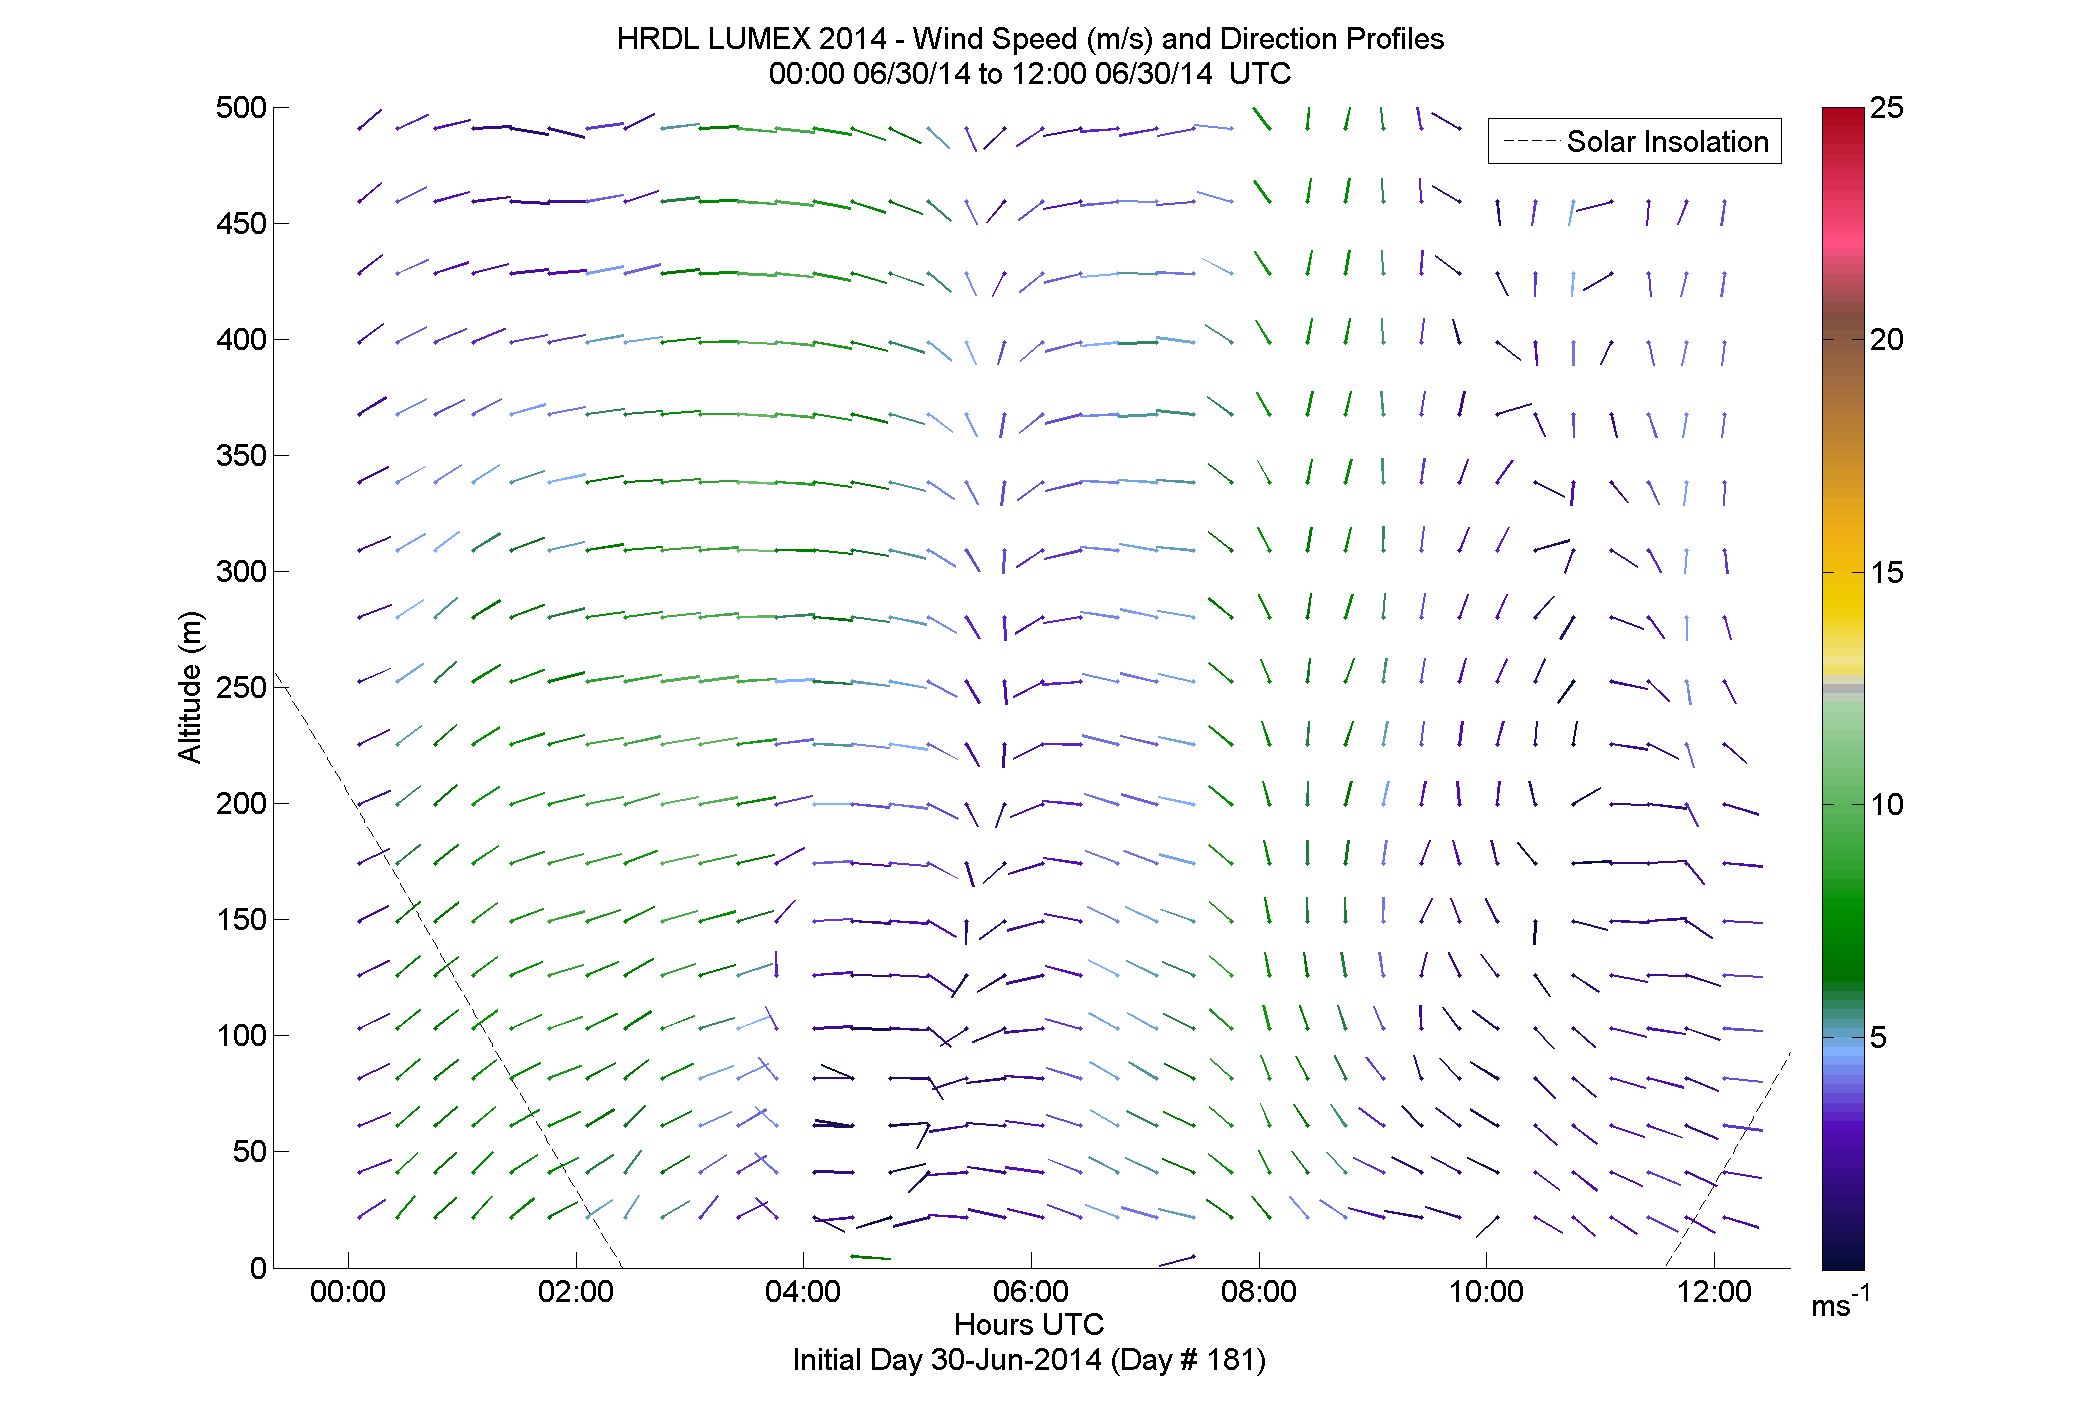 HRDL speed and direction profile - June 30 am